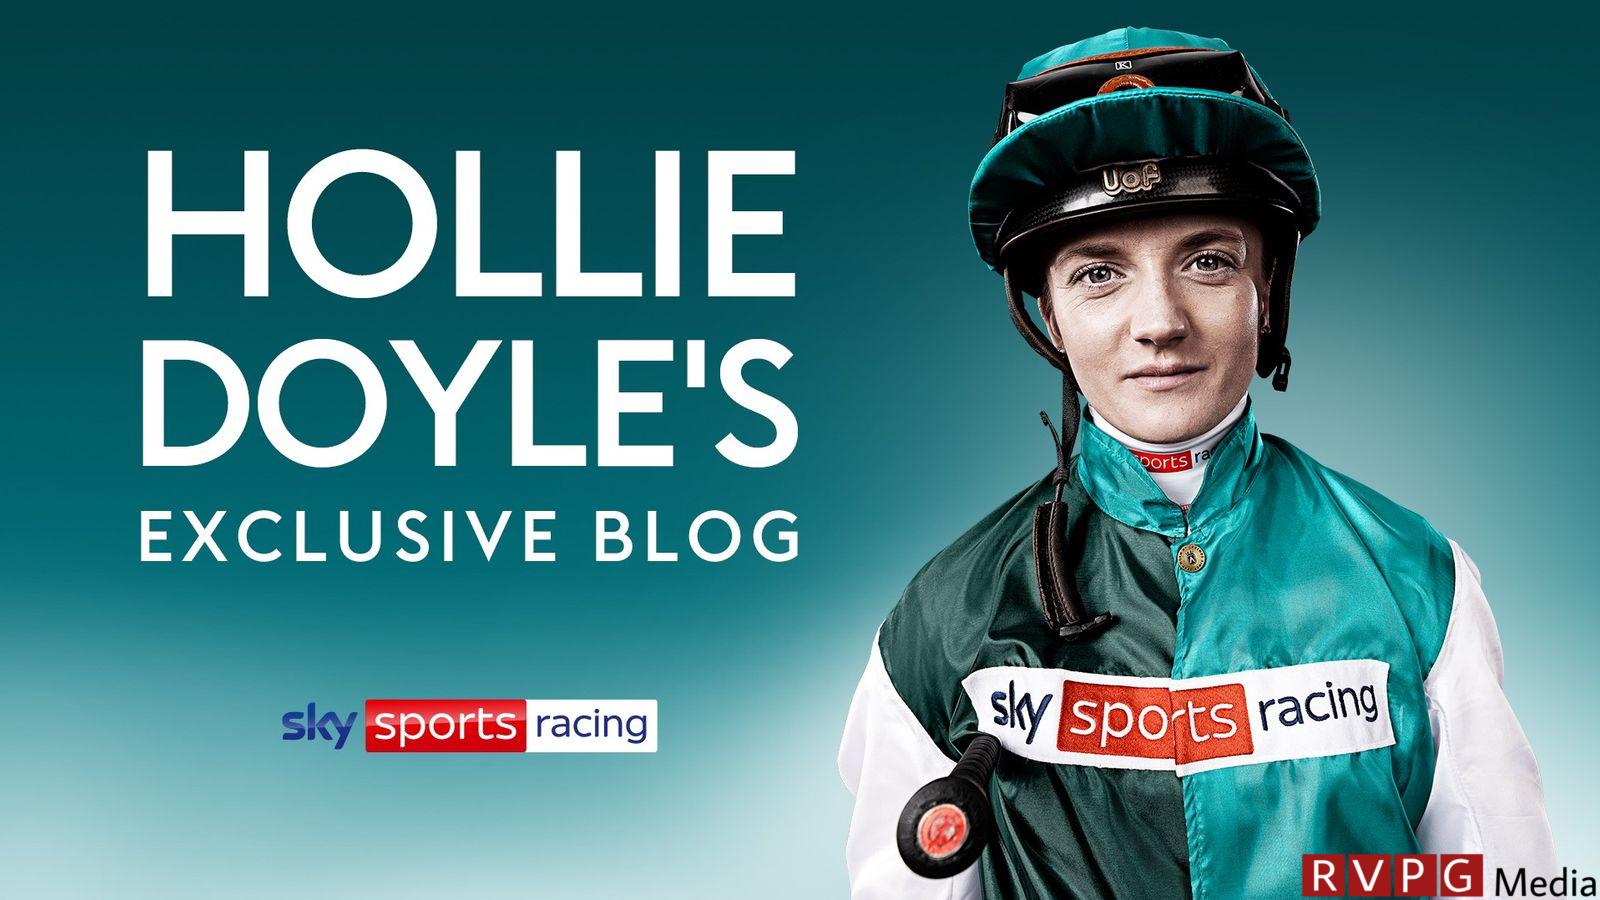 Hollie Doyle's exclusive blog on Sky Sports